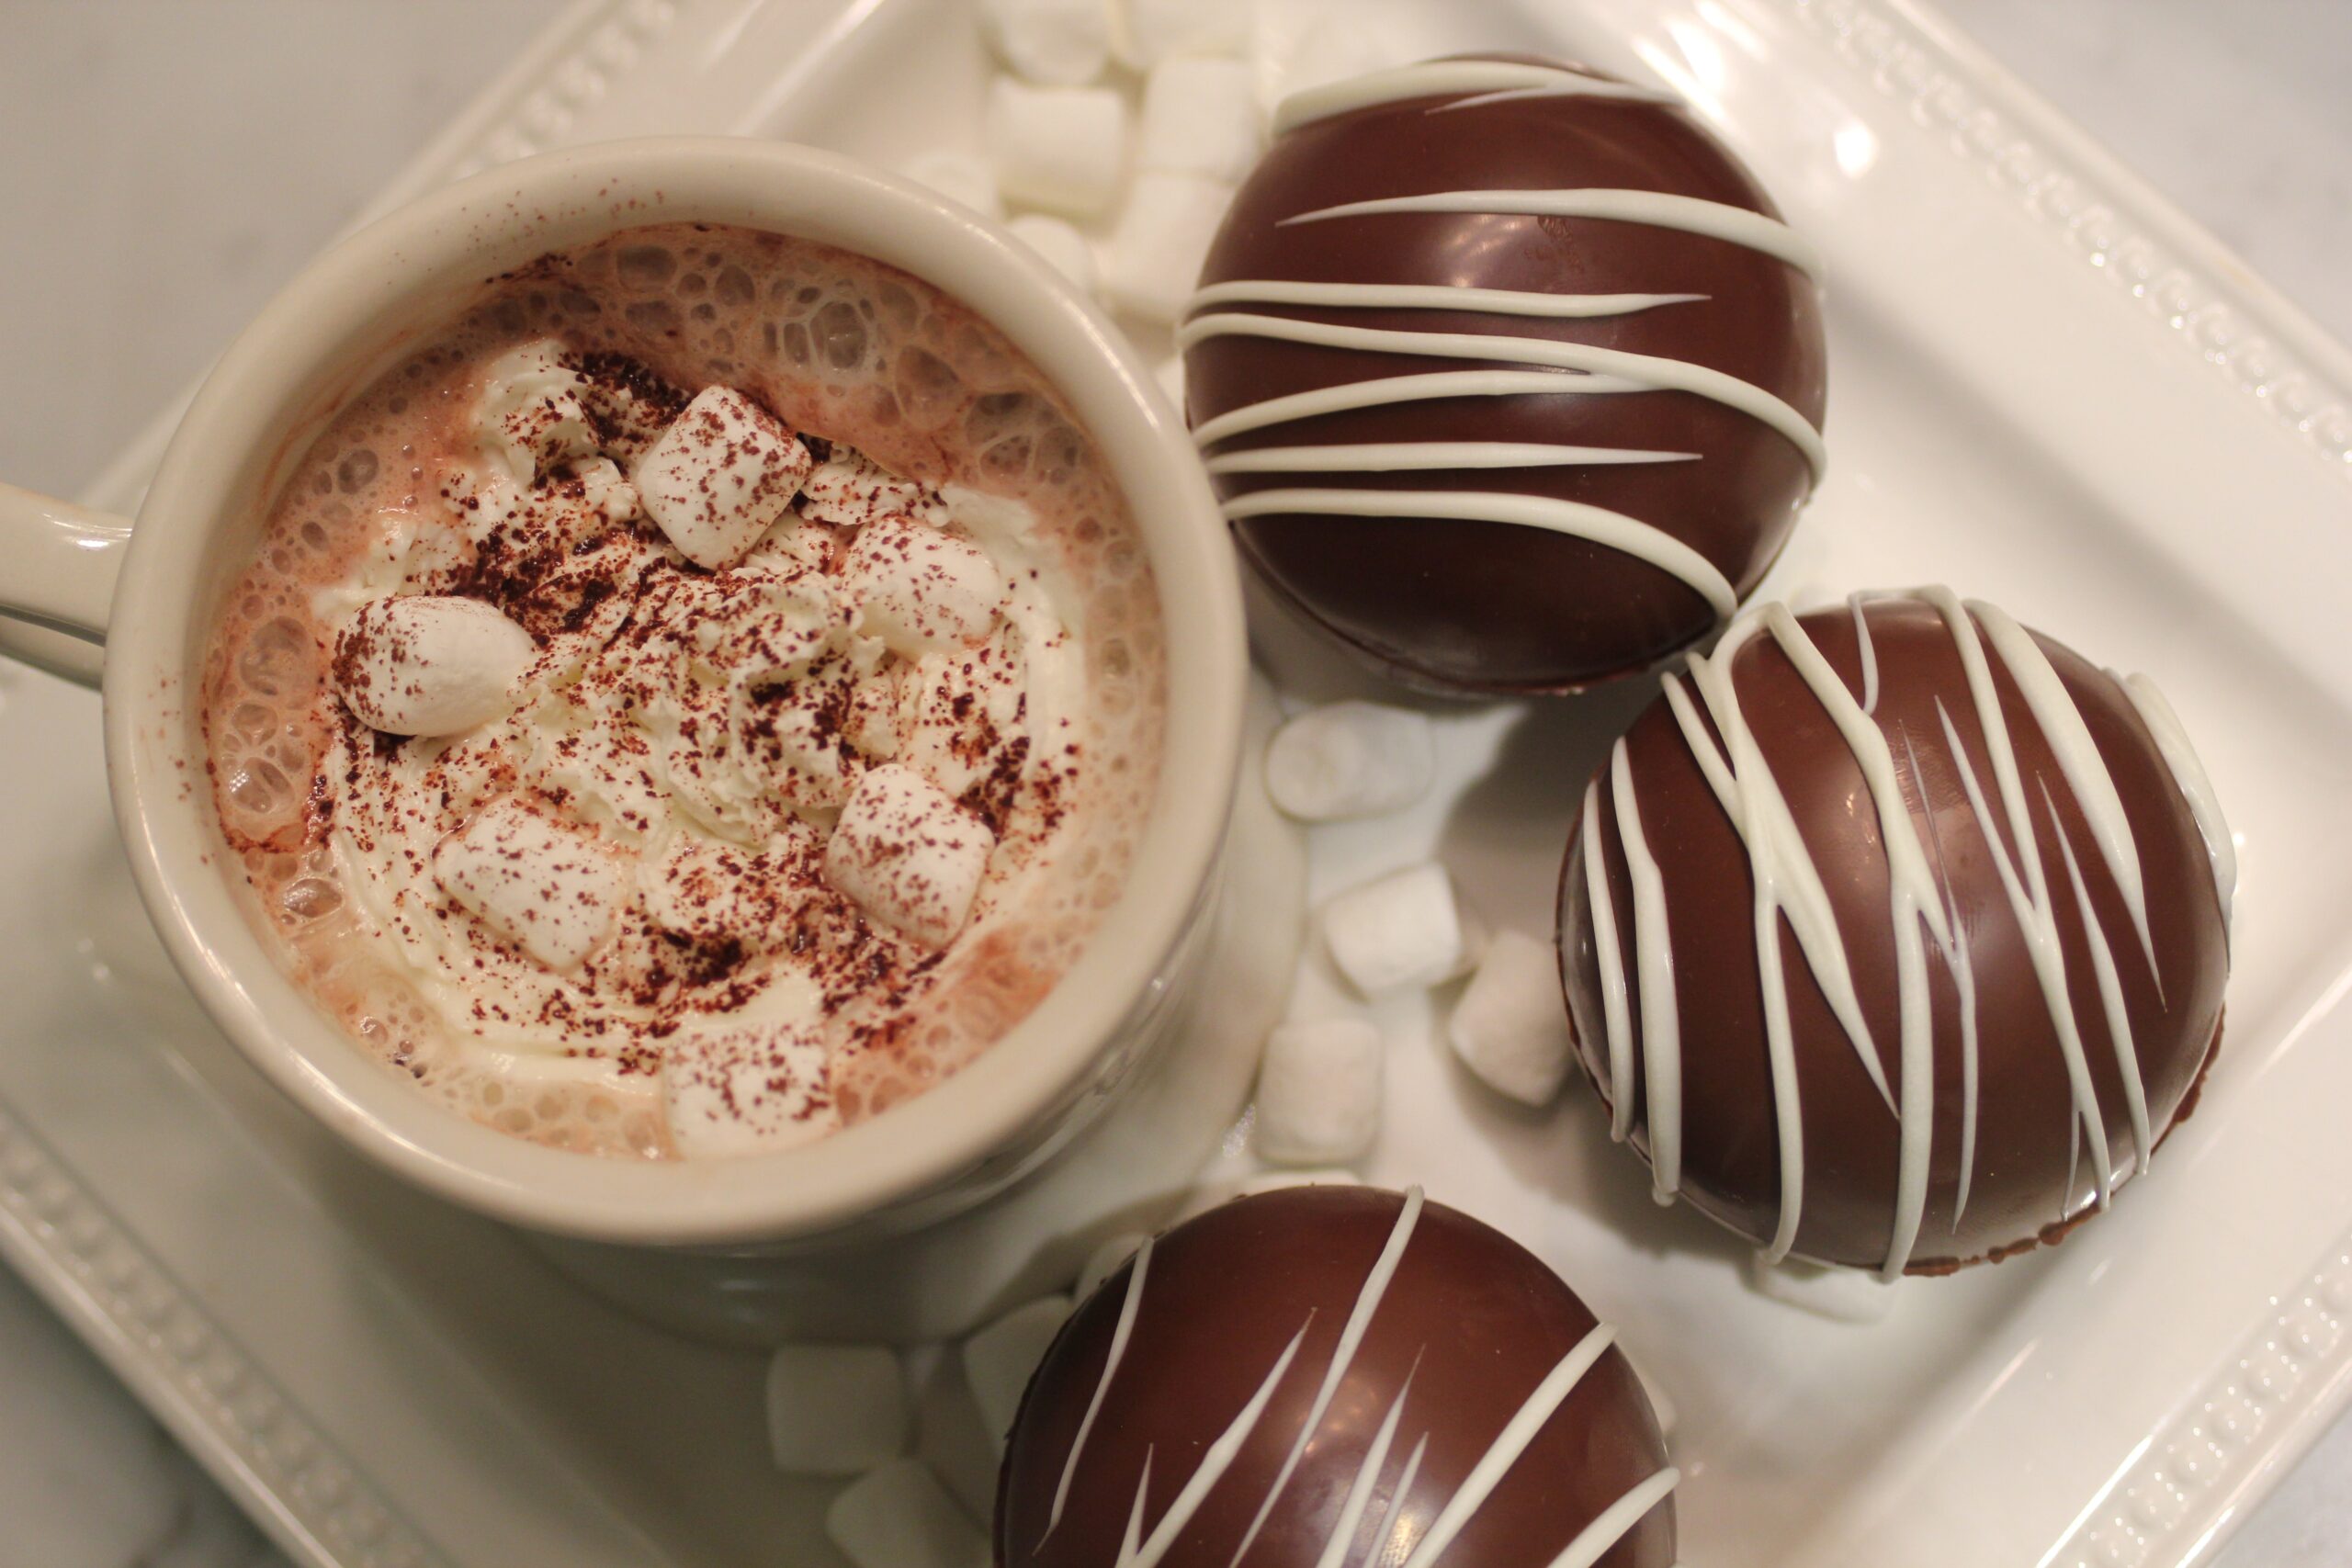 A twist on a holiday classic and childhood favorite, spiked hot chocolate is the perfect sweet treat for you and your guests. Thanksgiving cocktails are meant to be sweet and this one is so indulgent that you can replace it with dessert (or eat both since it's the holidays). Pictured: Hot chocolate.